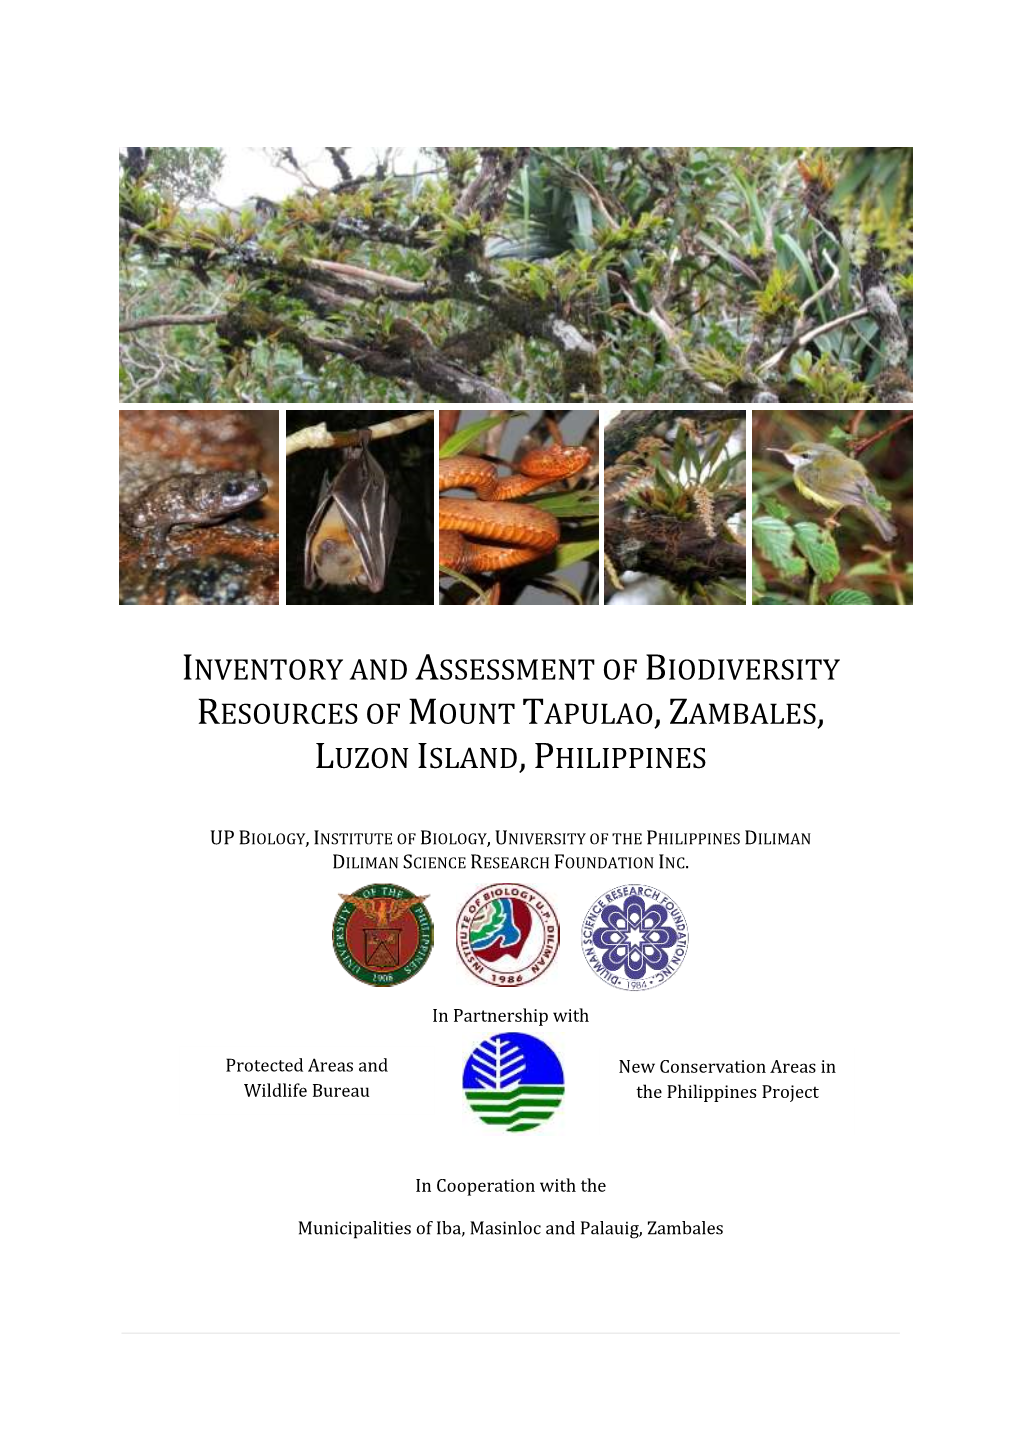 Inventory and Assessment of Biodiversity Resources of Mount Tapulao, Zambales, Luzon Island, Philippines